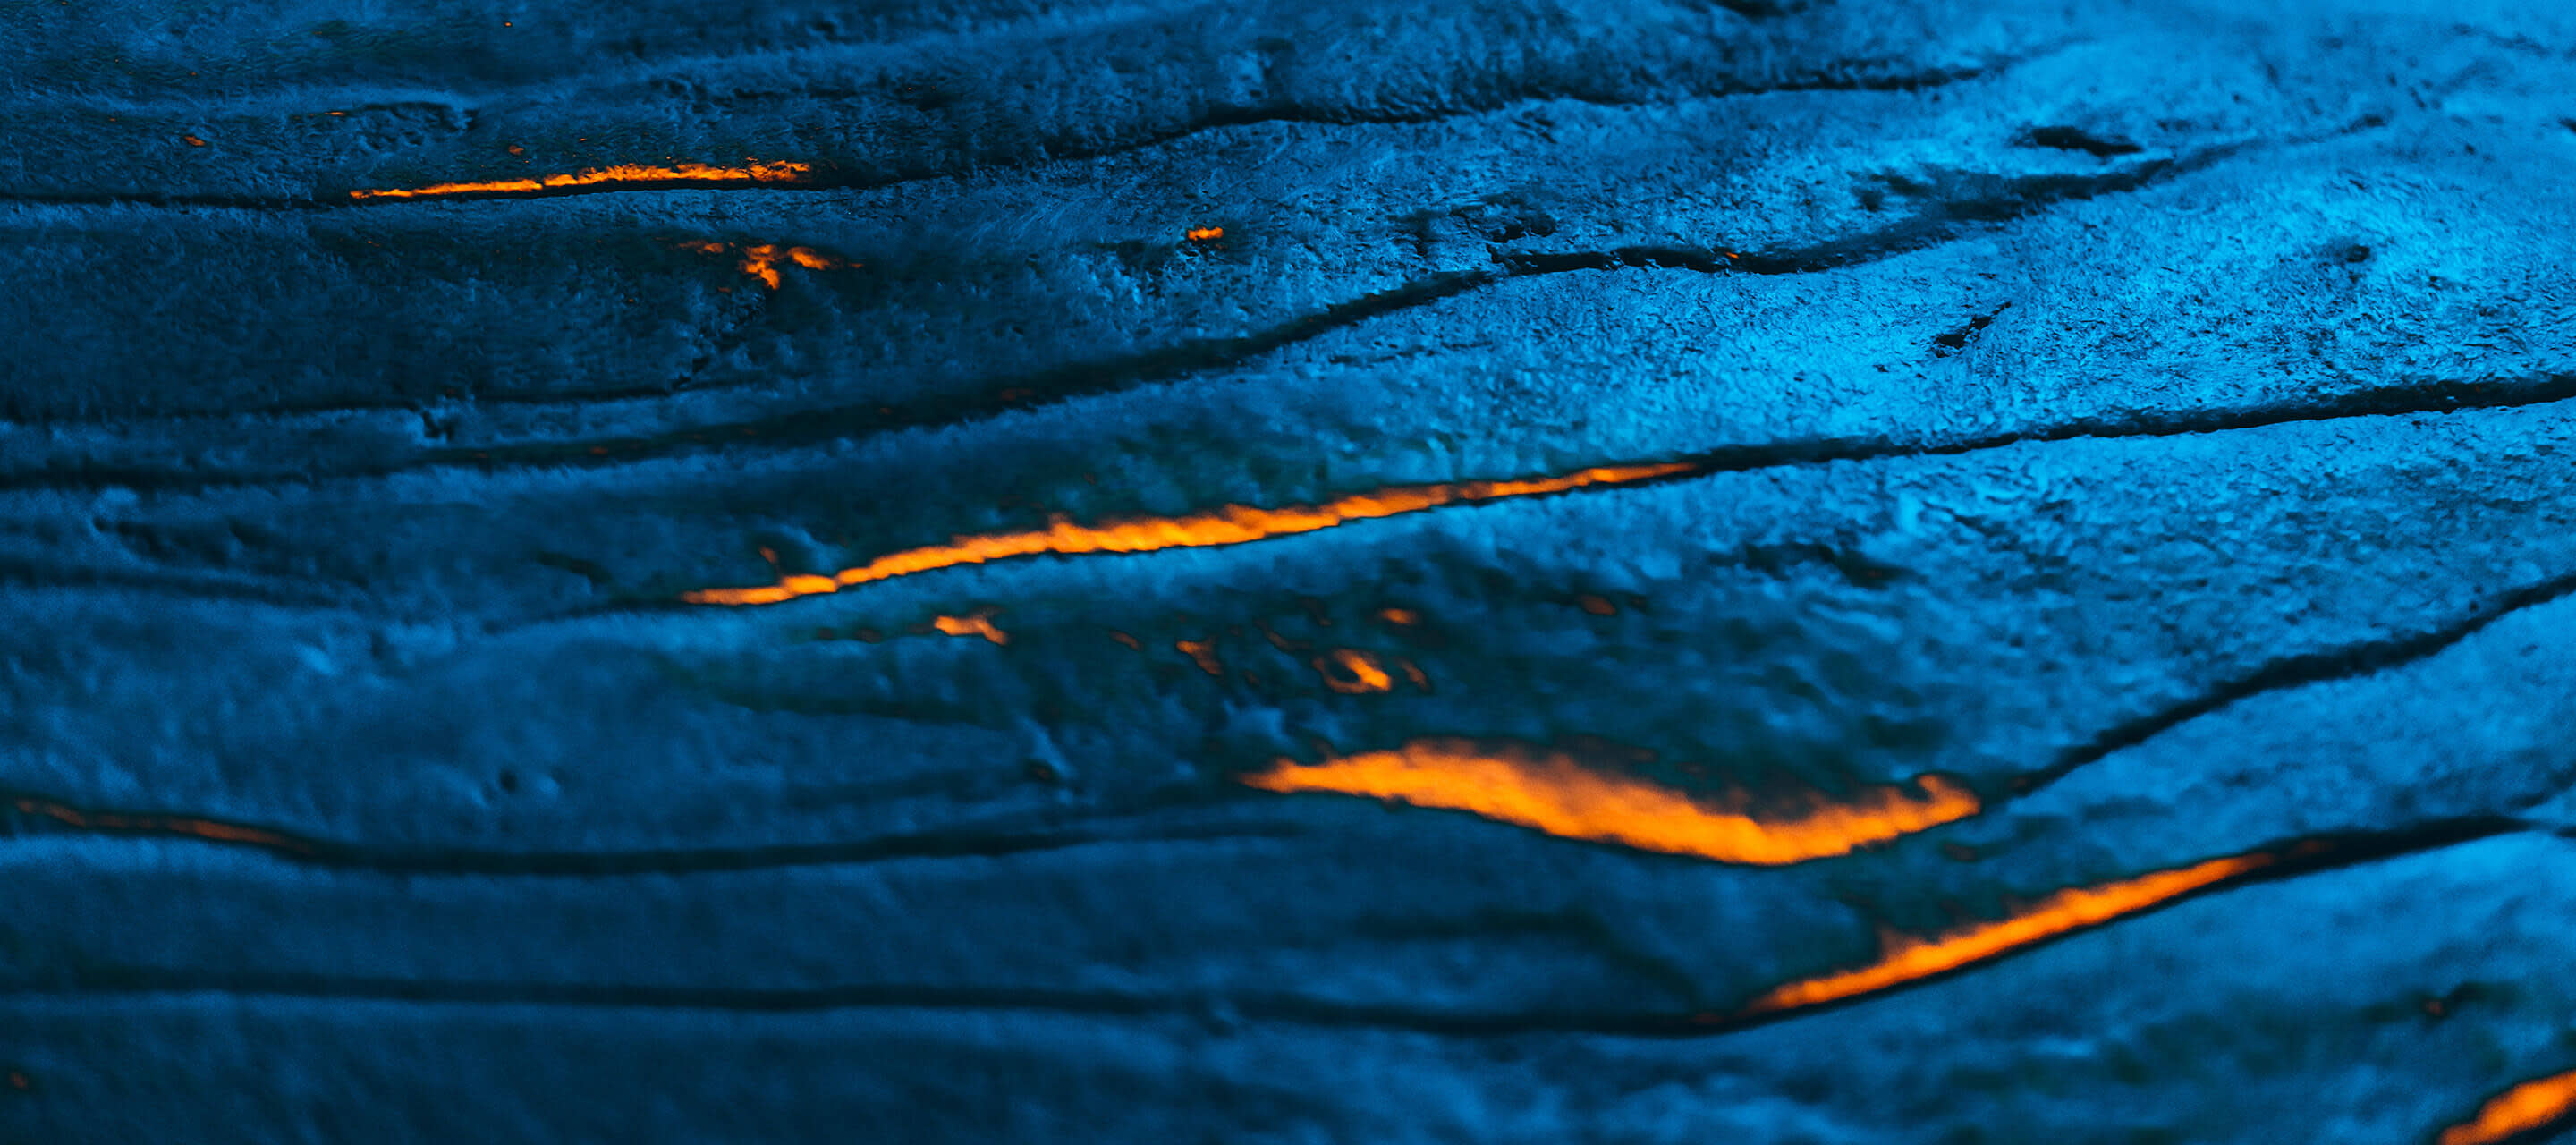 Textured metallic colored lava field with hot burning magma